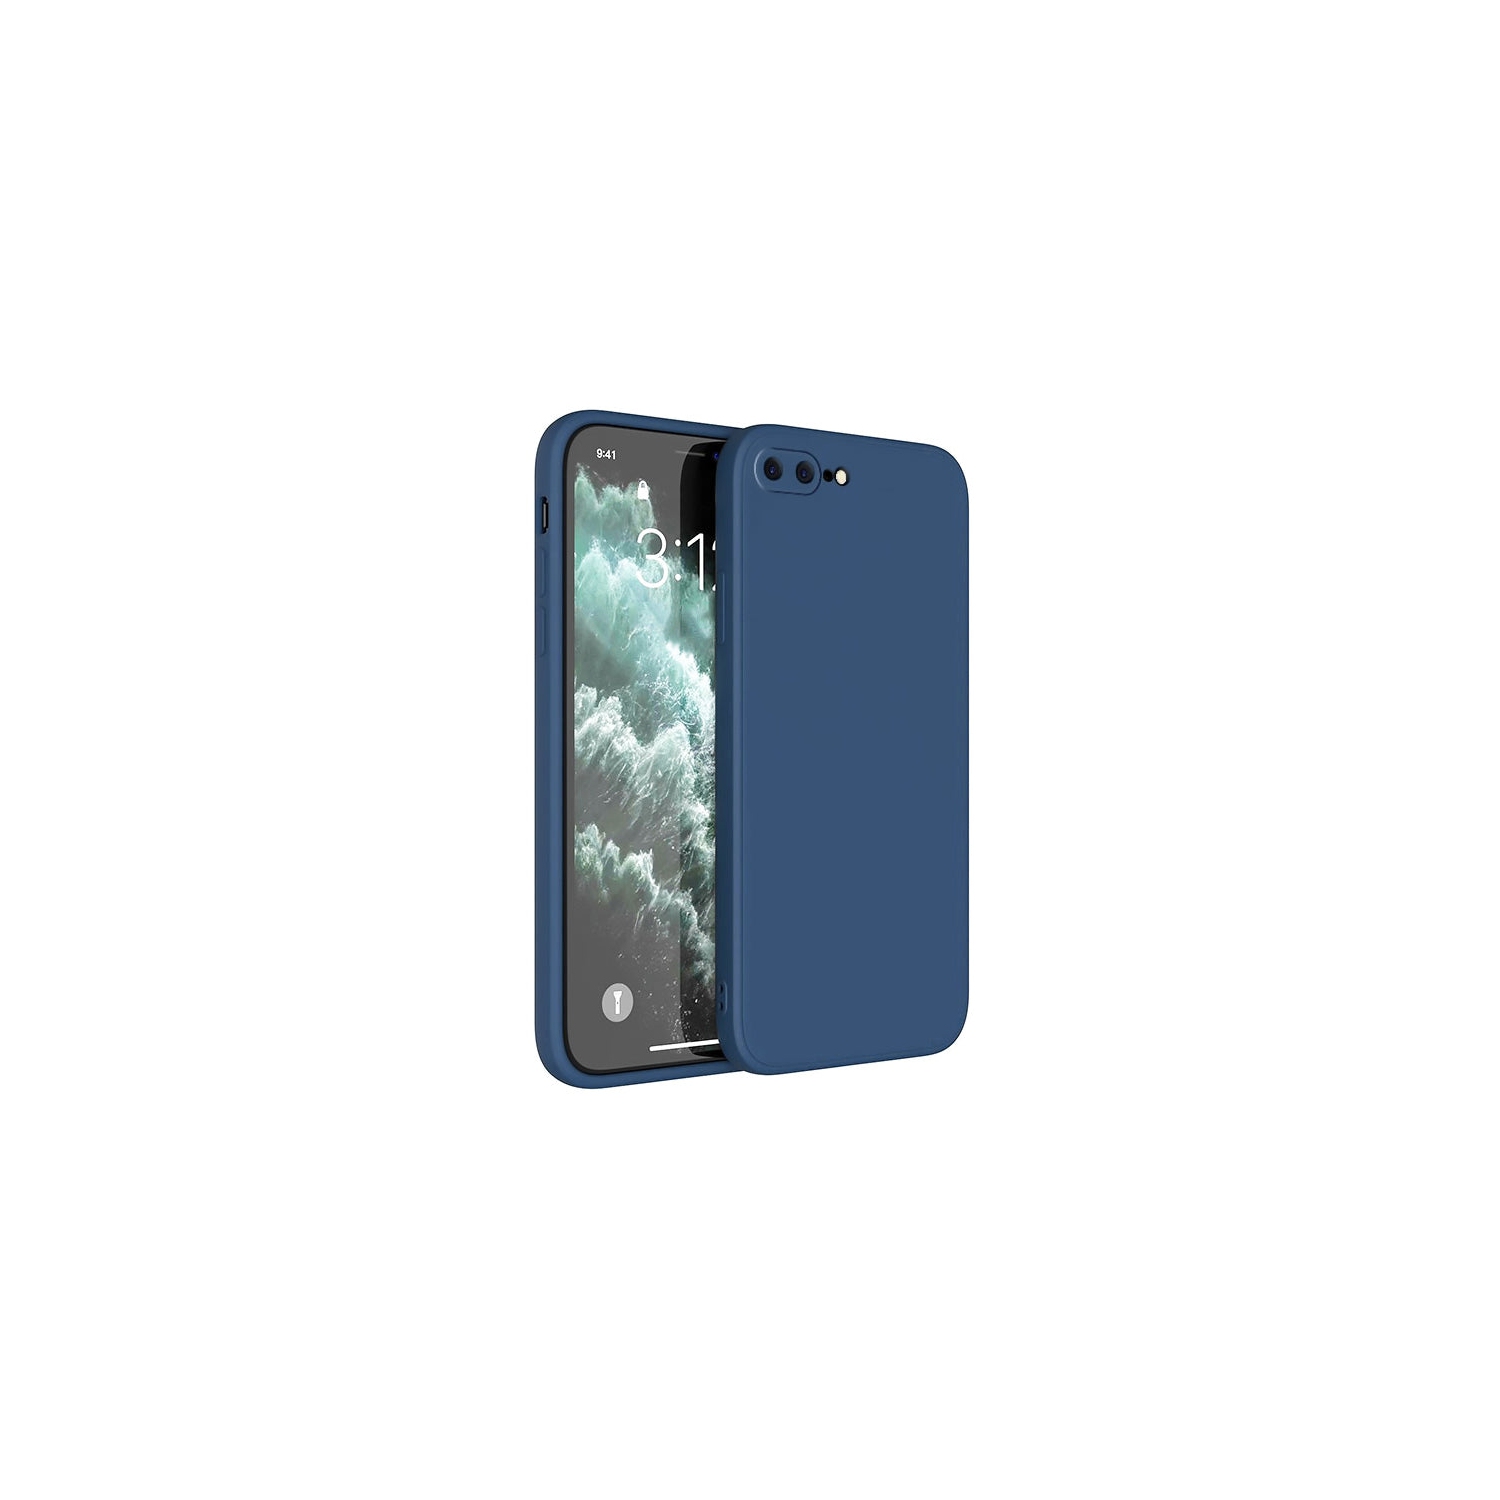 PANDACO Soft Shell Matte Navy Case for iPhone 7 Plus or iPhone 8 Plus